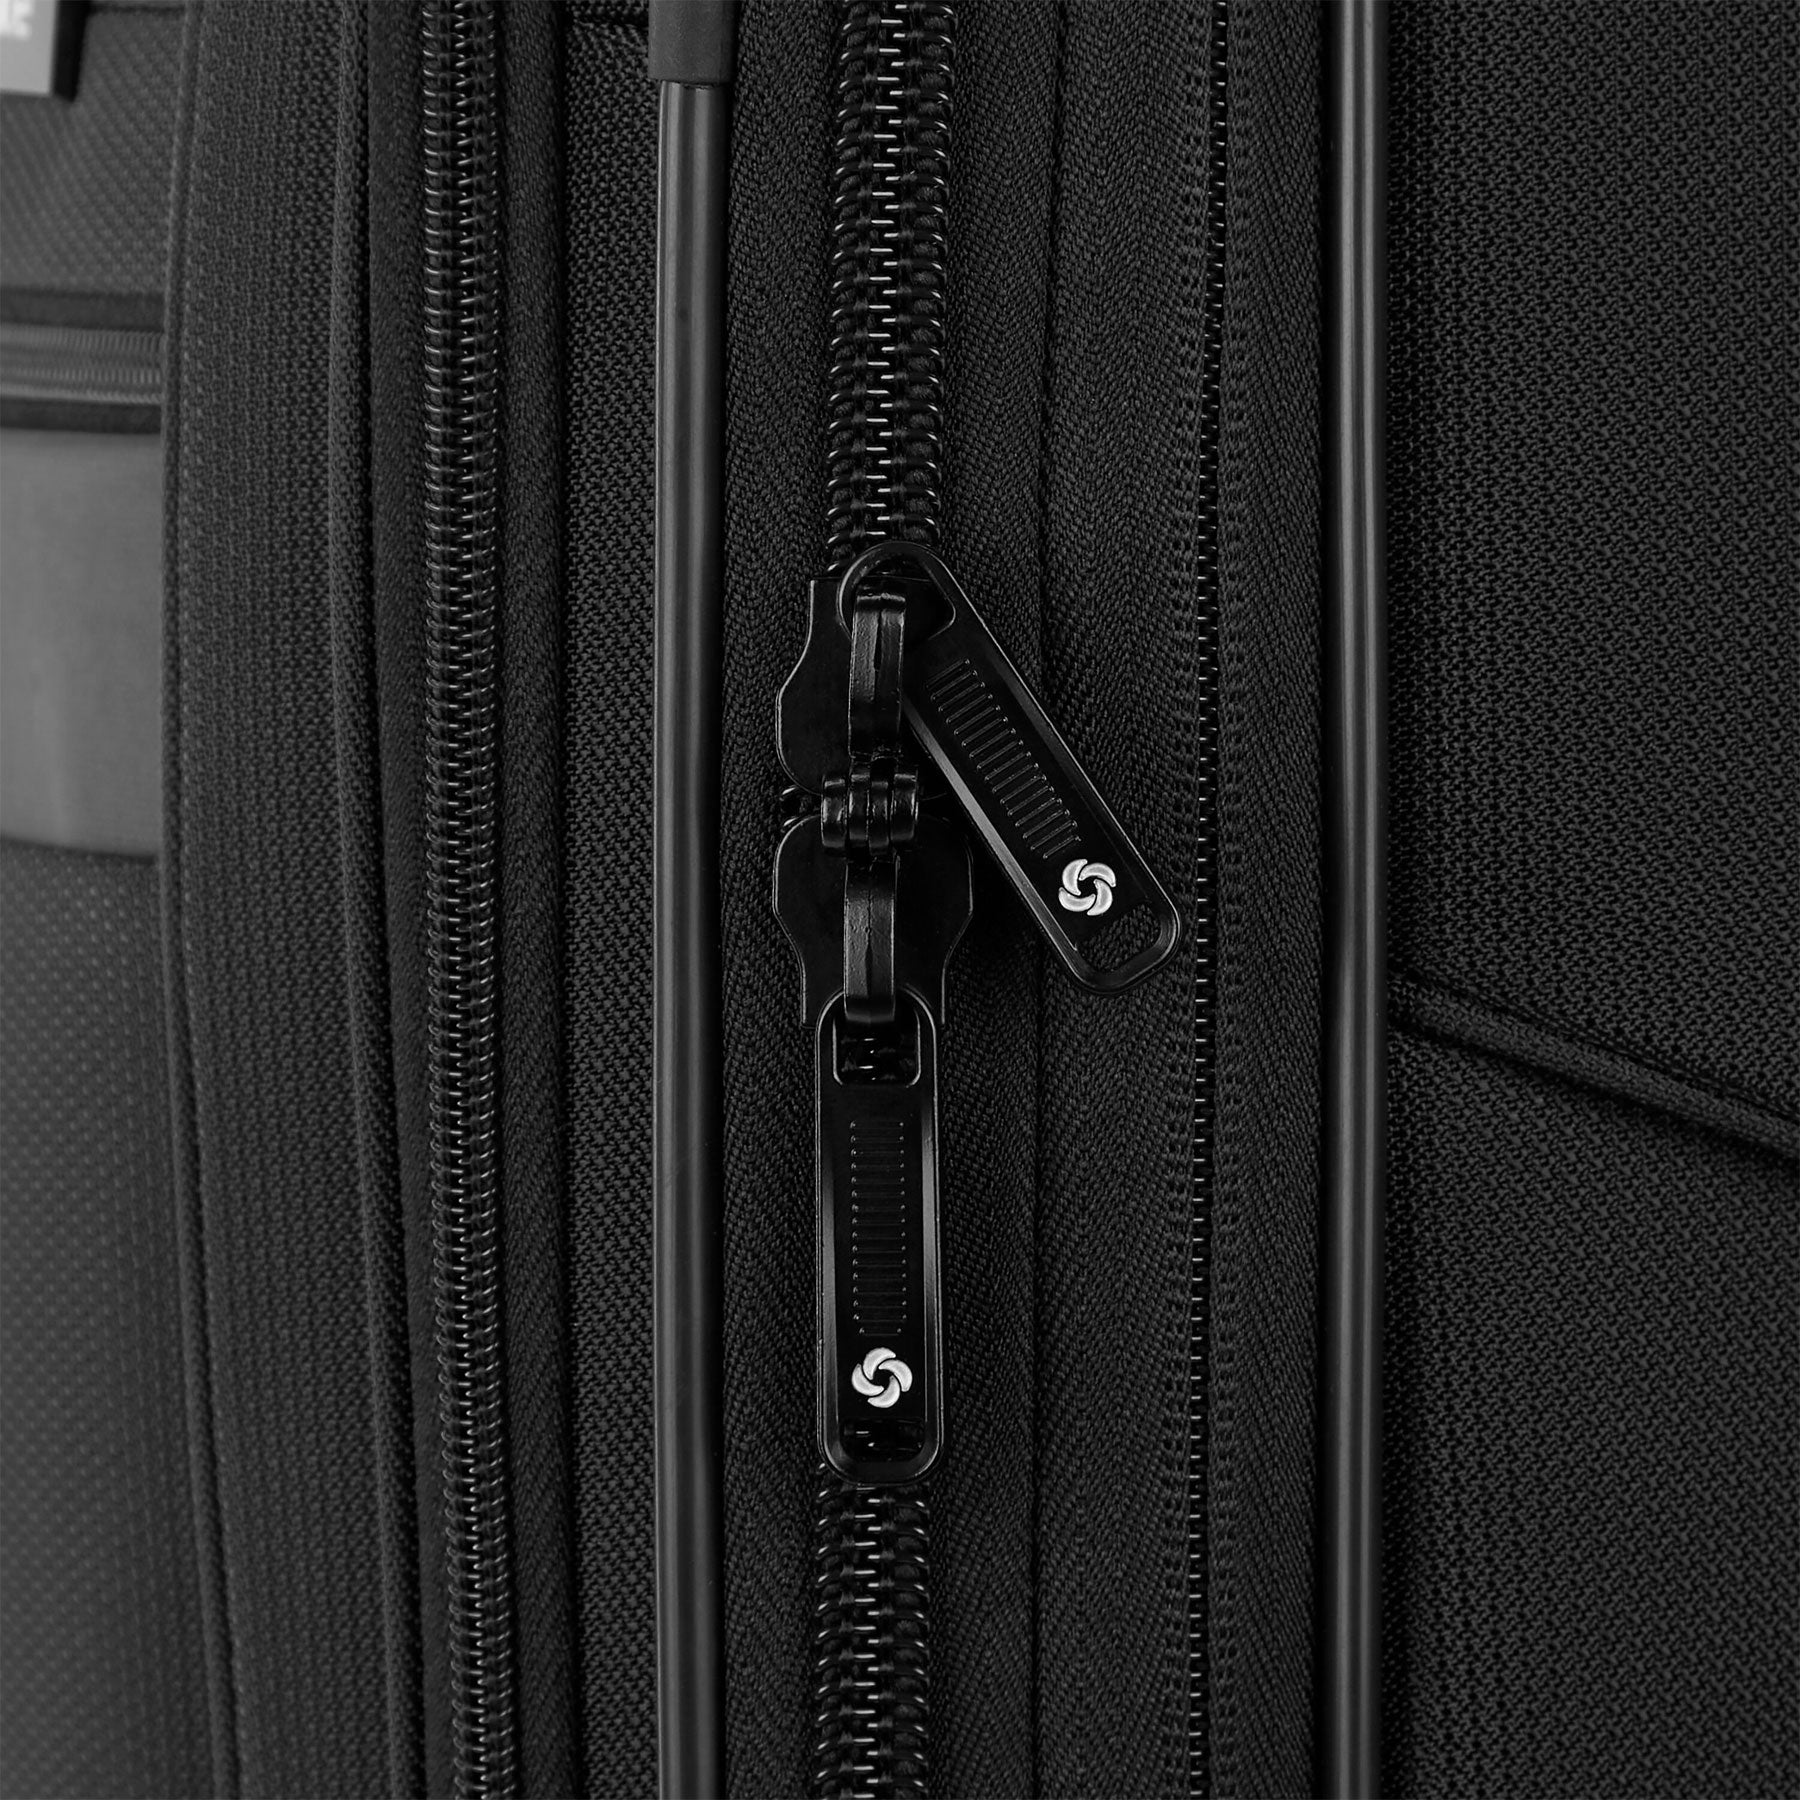 Samsonite Ascella 3.0 Carry-On Expandable Spinner